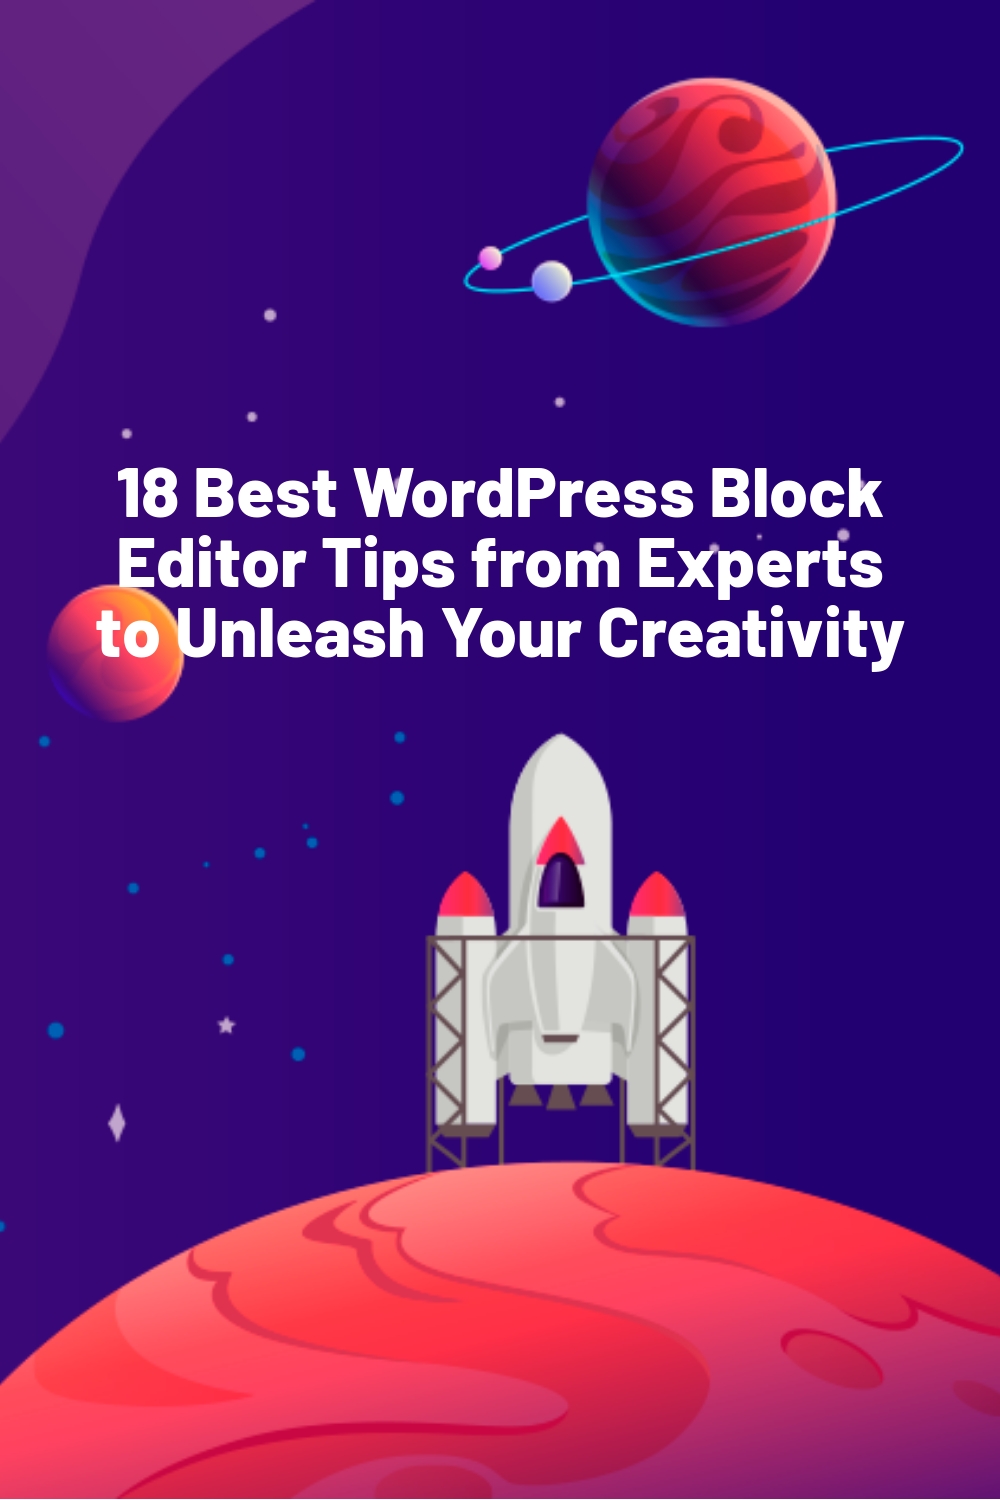 18 Best WordPress Block Editor Tips from Experts to Unleash Your Creativity